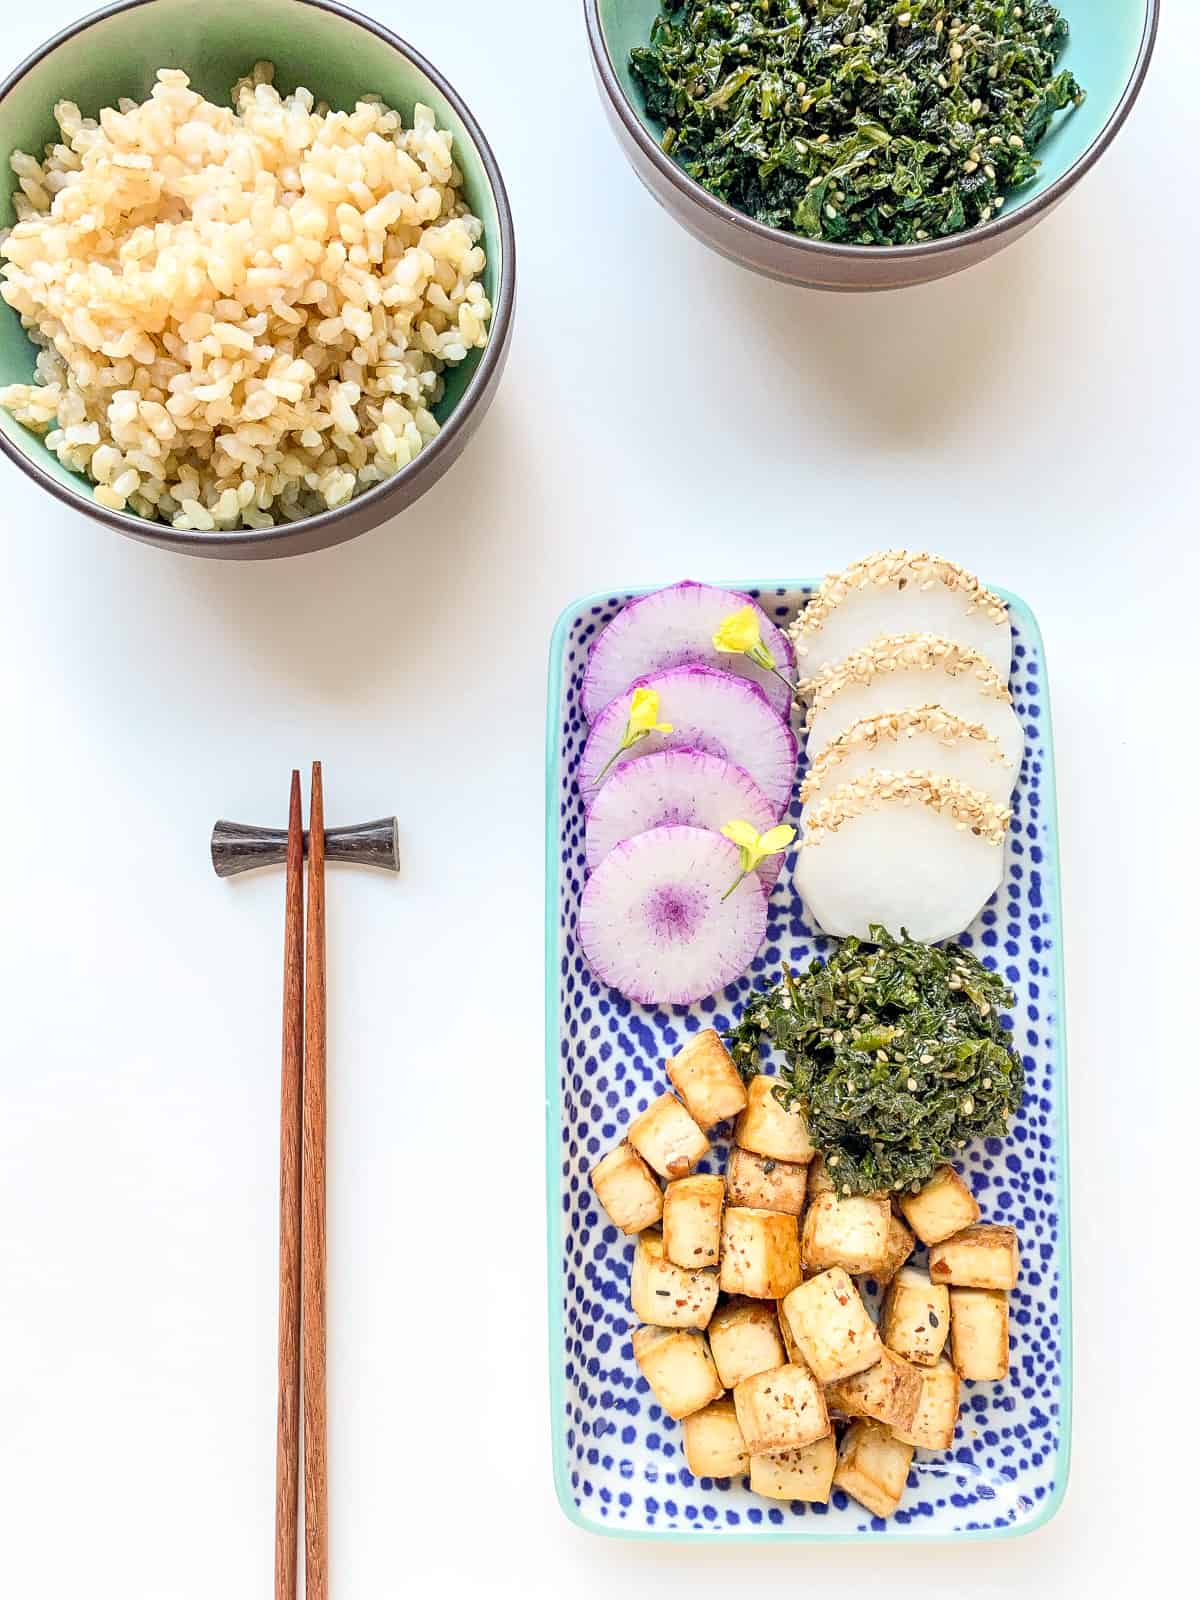 An image of Garden Fresh Furikake as part of a full meal alongside tofu, rice, and slides radishes.